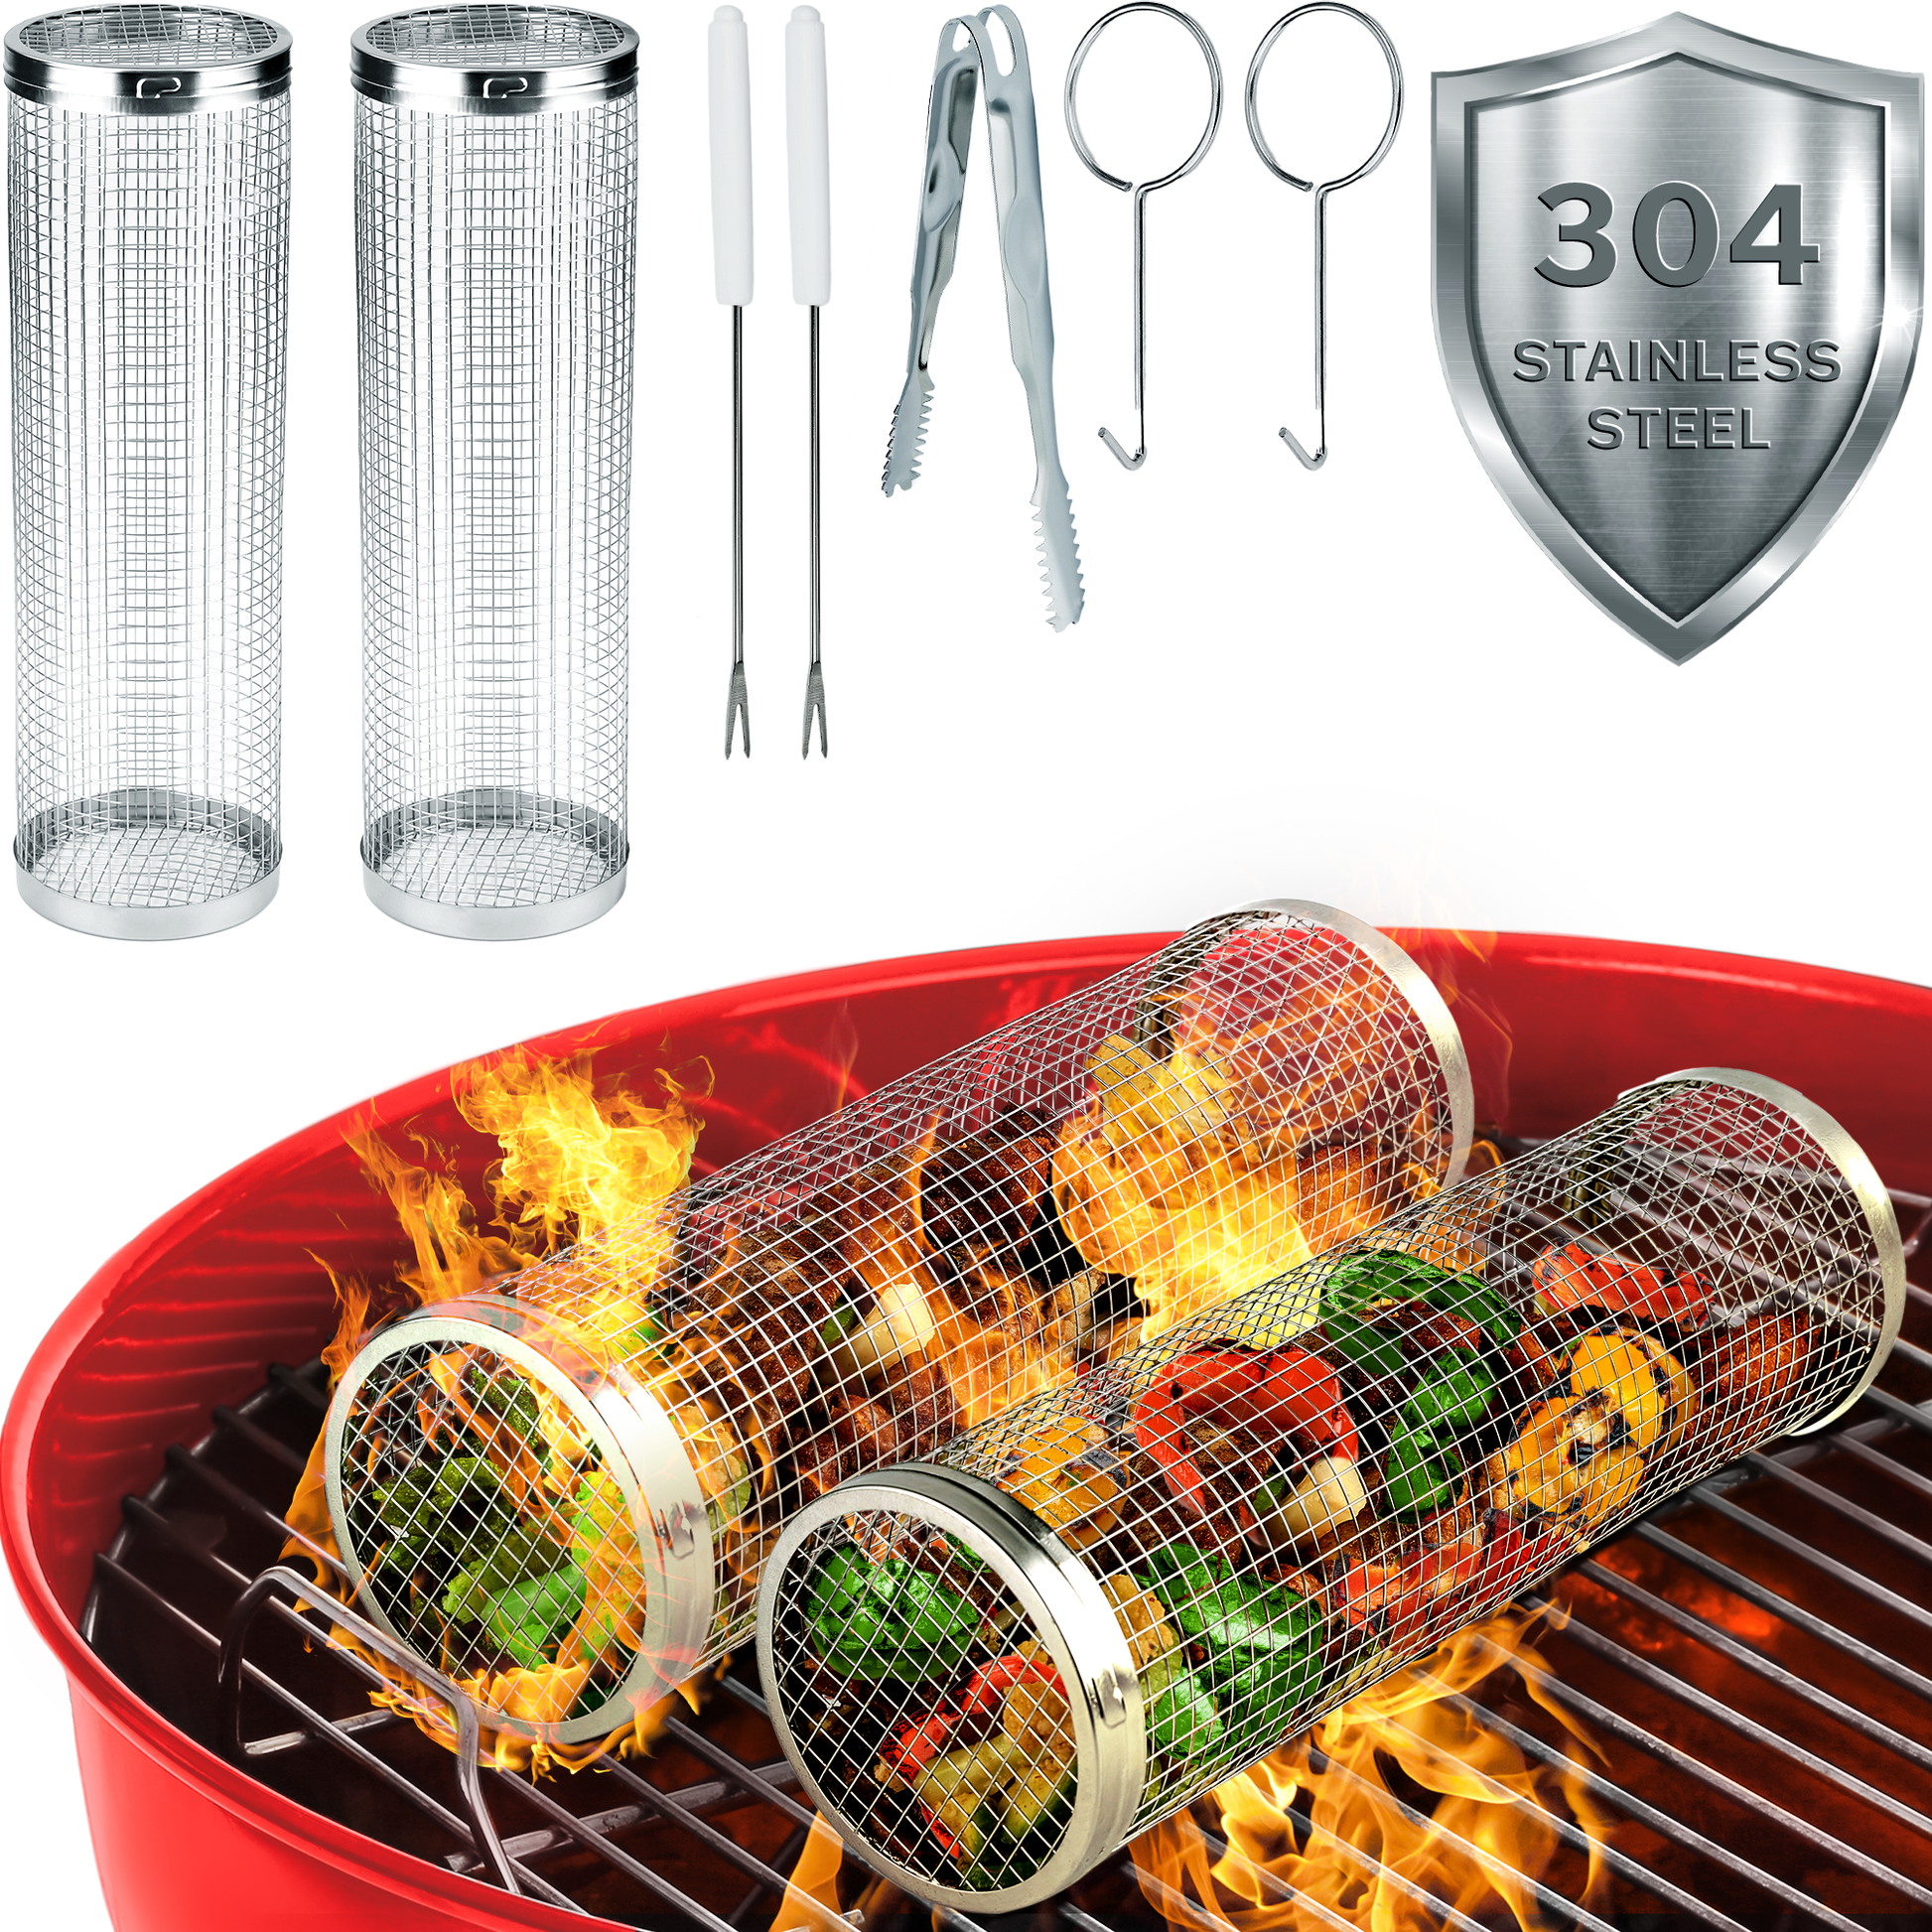 2 rolling bbq basket on top of red grill, featuring included forks, tongs, hooks, stainless steel shield label 